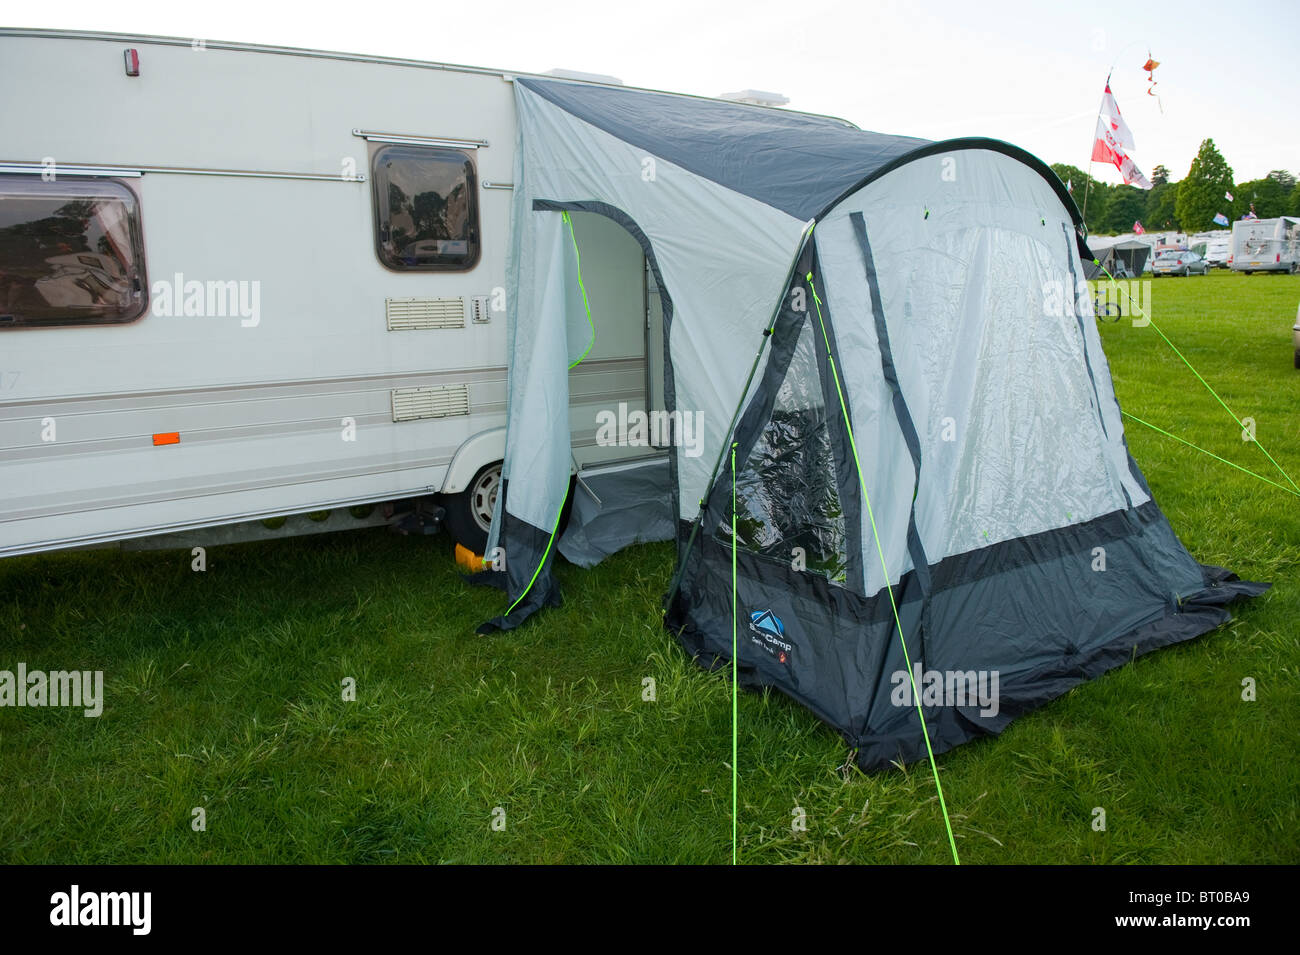 Caravan Porch Awning Attached Stock Photo Alamy